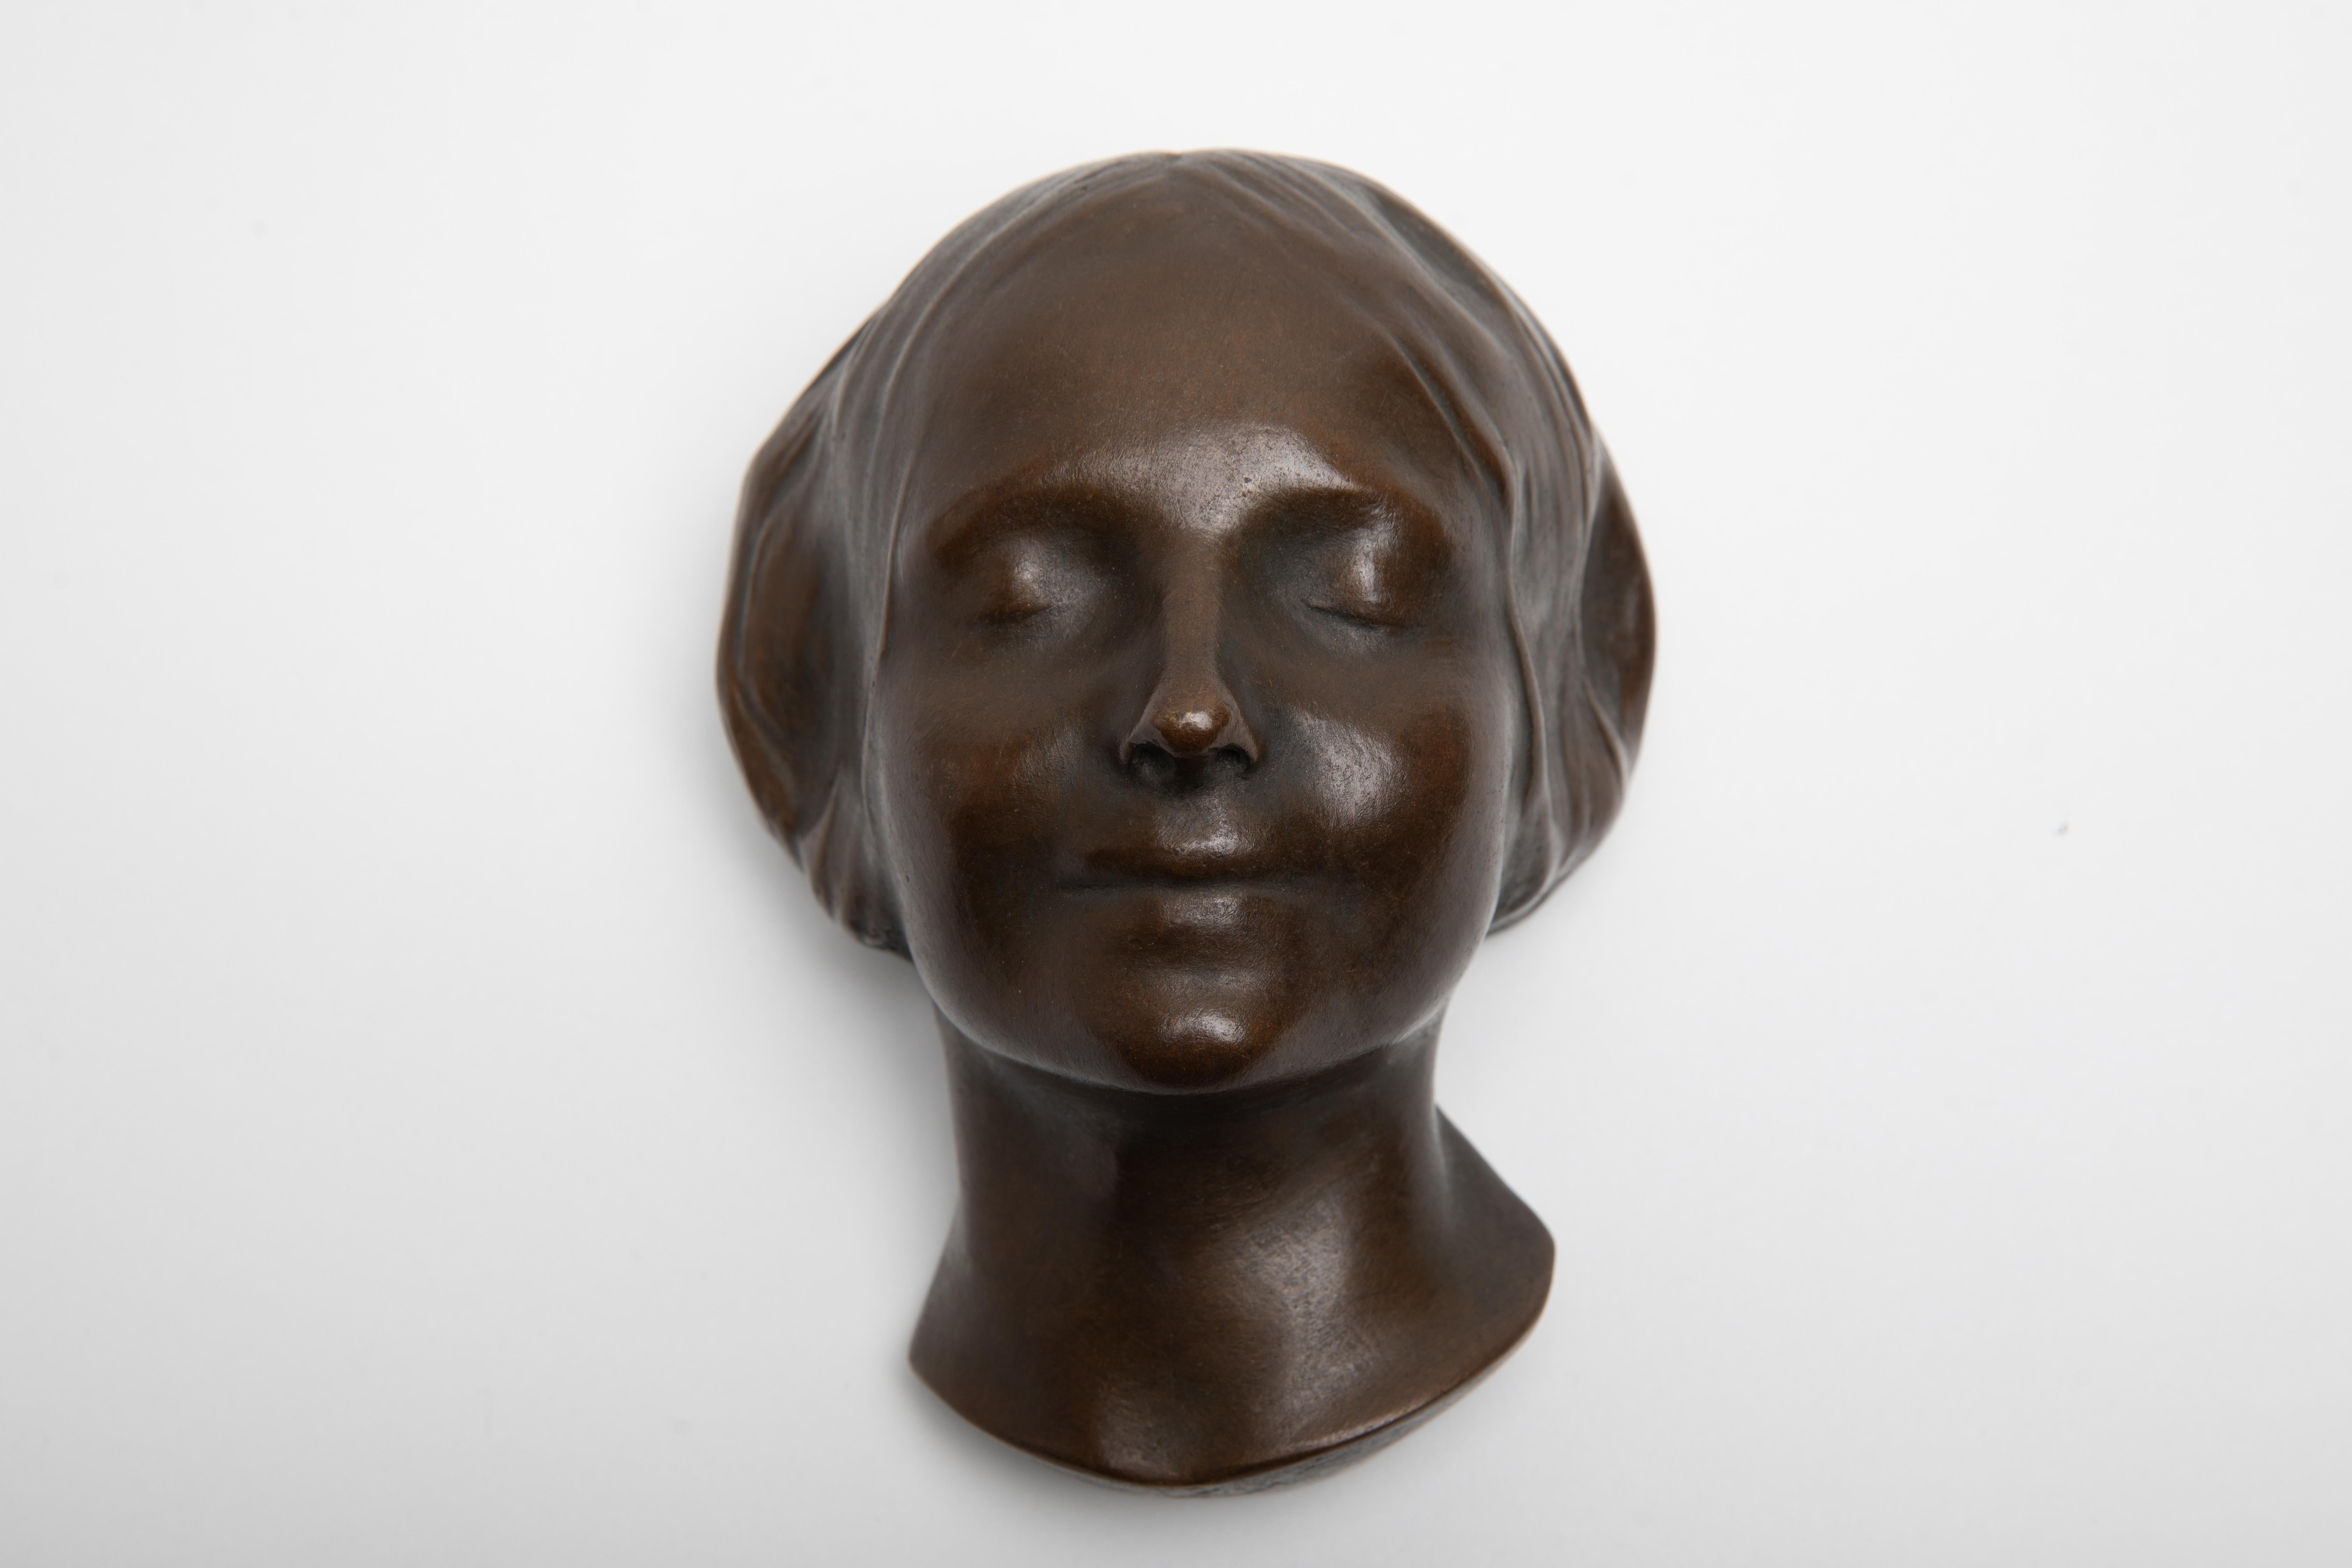 L'Inconnue de la Seine or The Unknown Woman of the Seine (1900 - 1920)

The bronze likeness of a young girl found drowned in the Seine river in the late 19th century. The subject of considerable legend, identical examples in plaster, marble, bronze